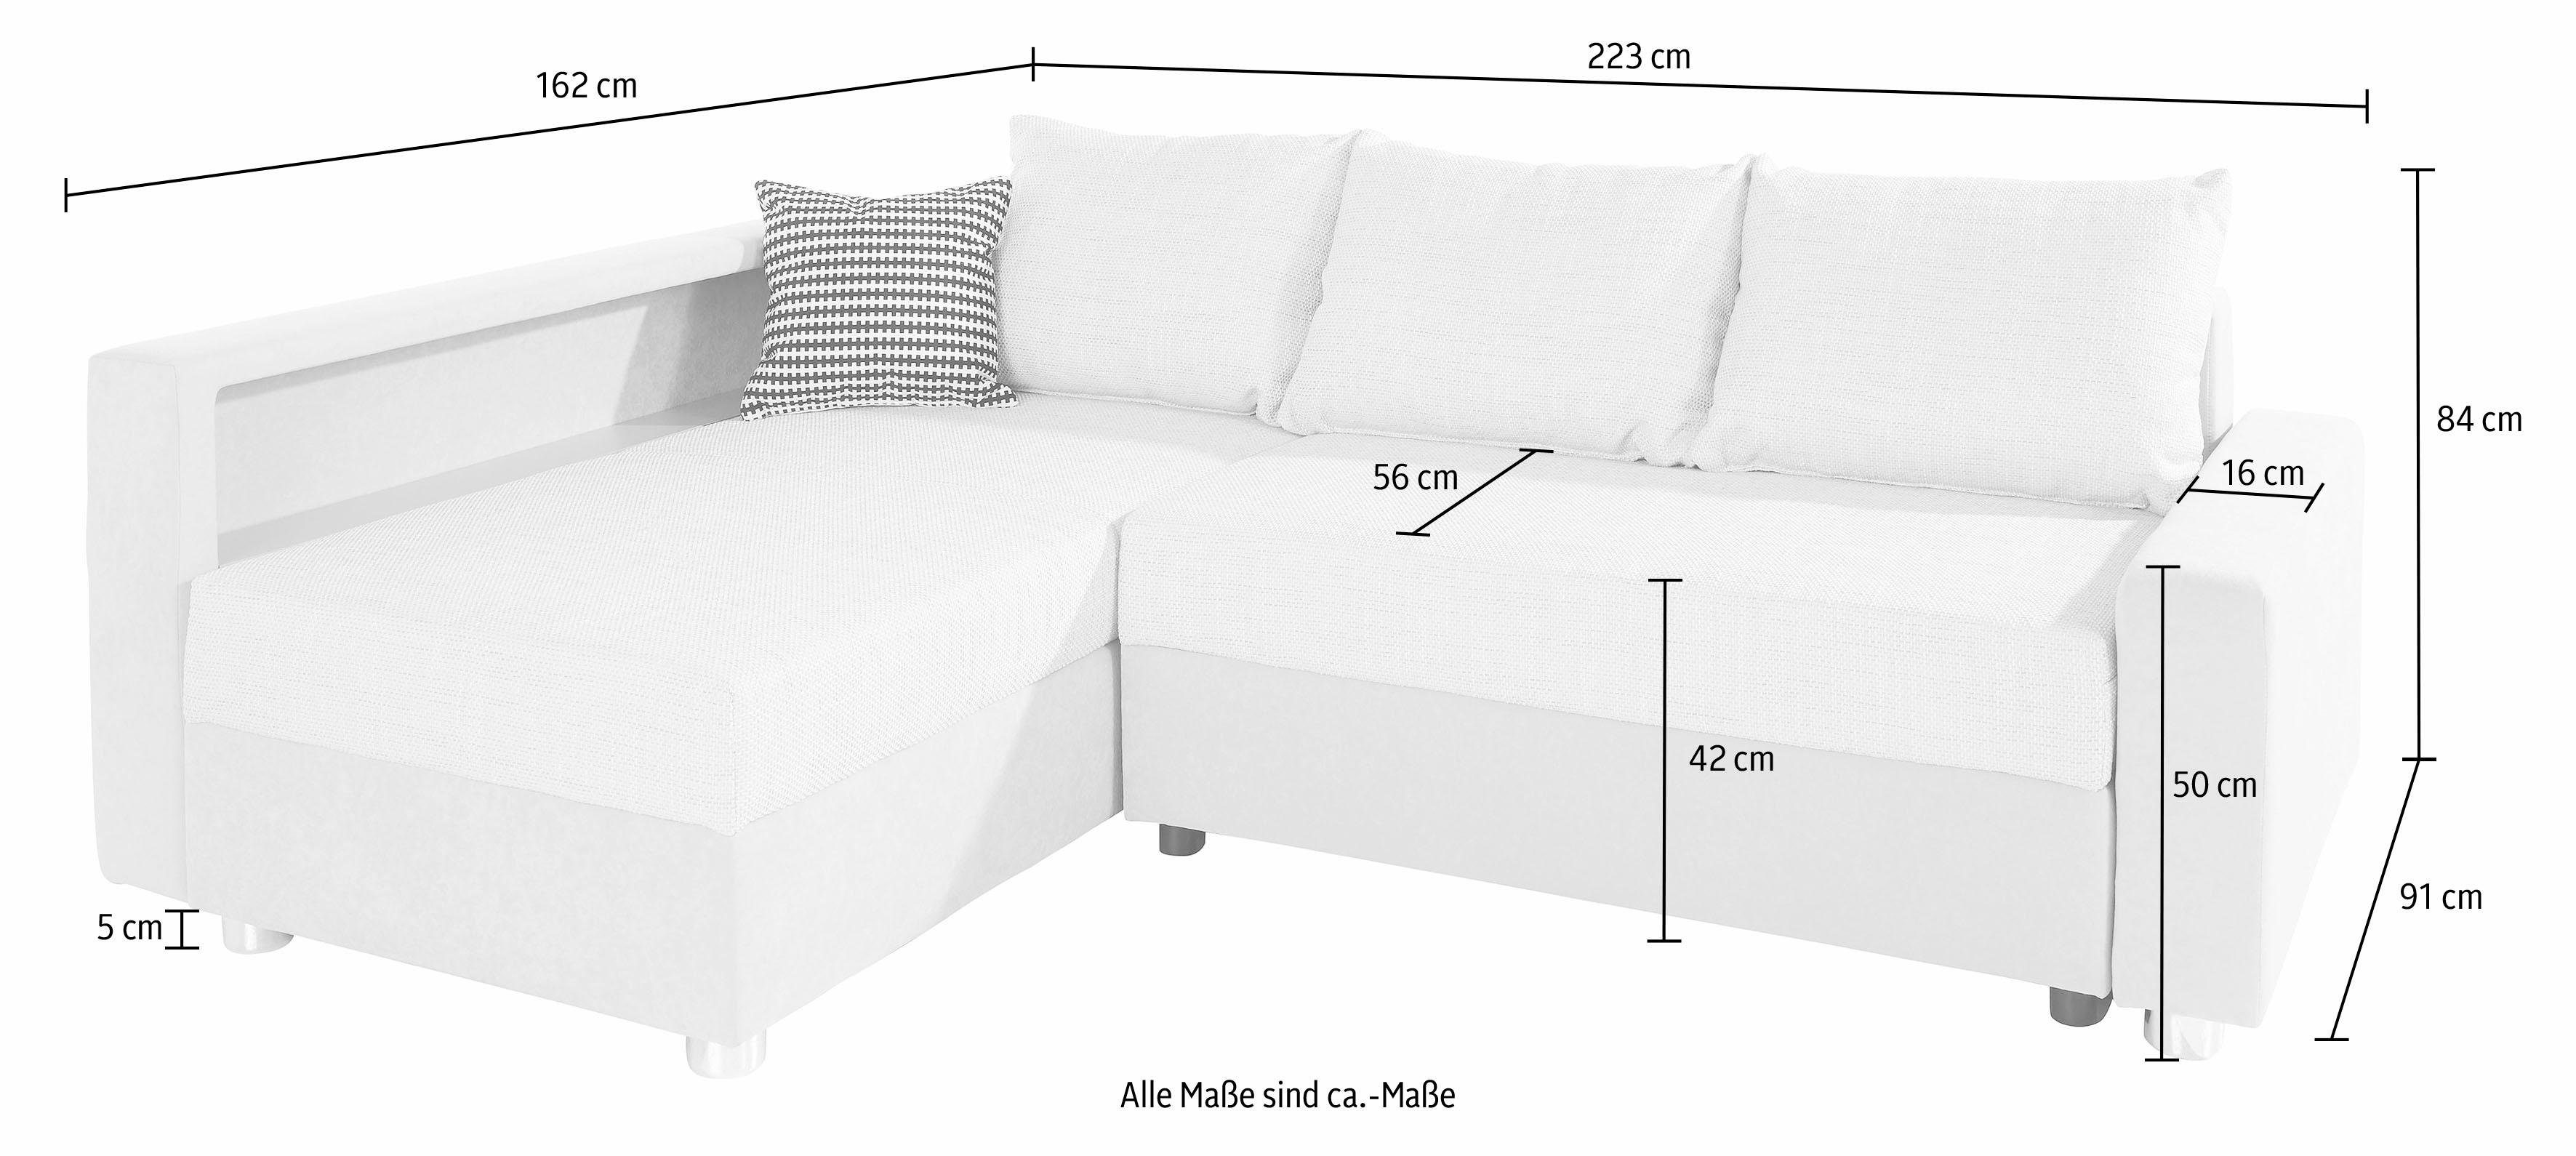 COLLECTION AB Ecksofa Relax, mit RGB-LED-Beleuchtung wahlweise Bettfunktion, Federkern, inklusive